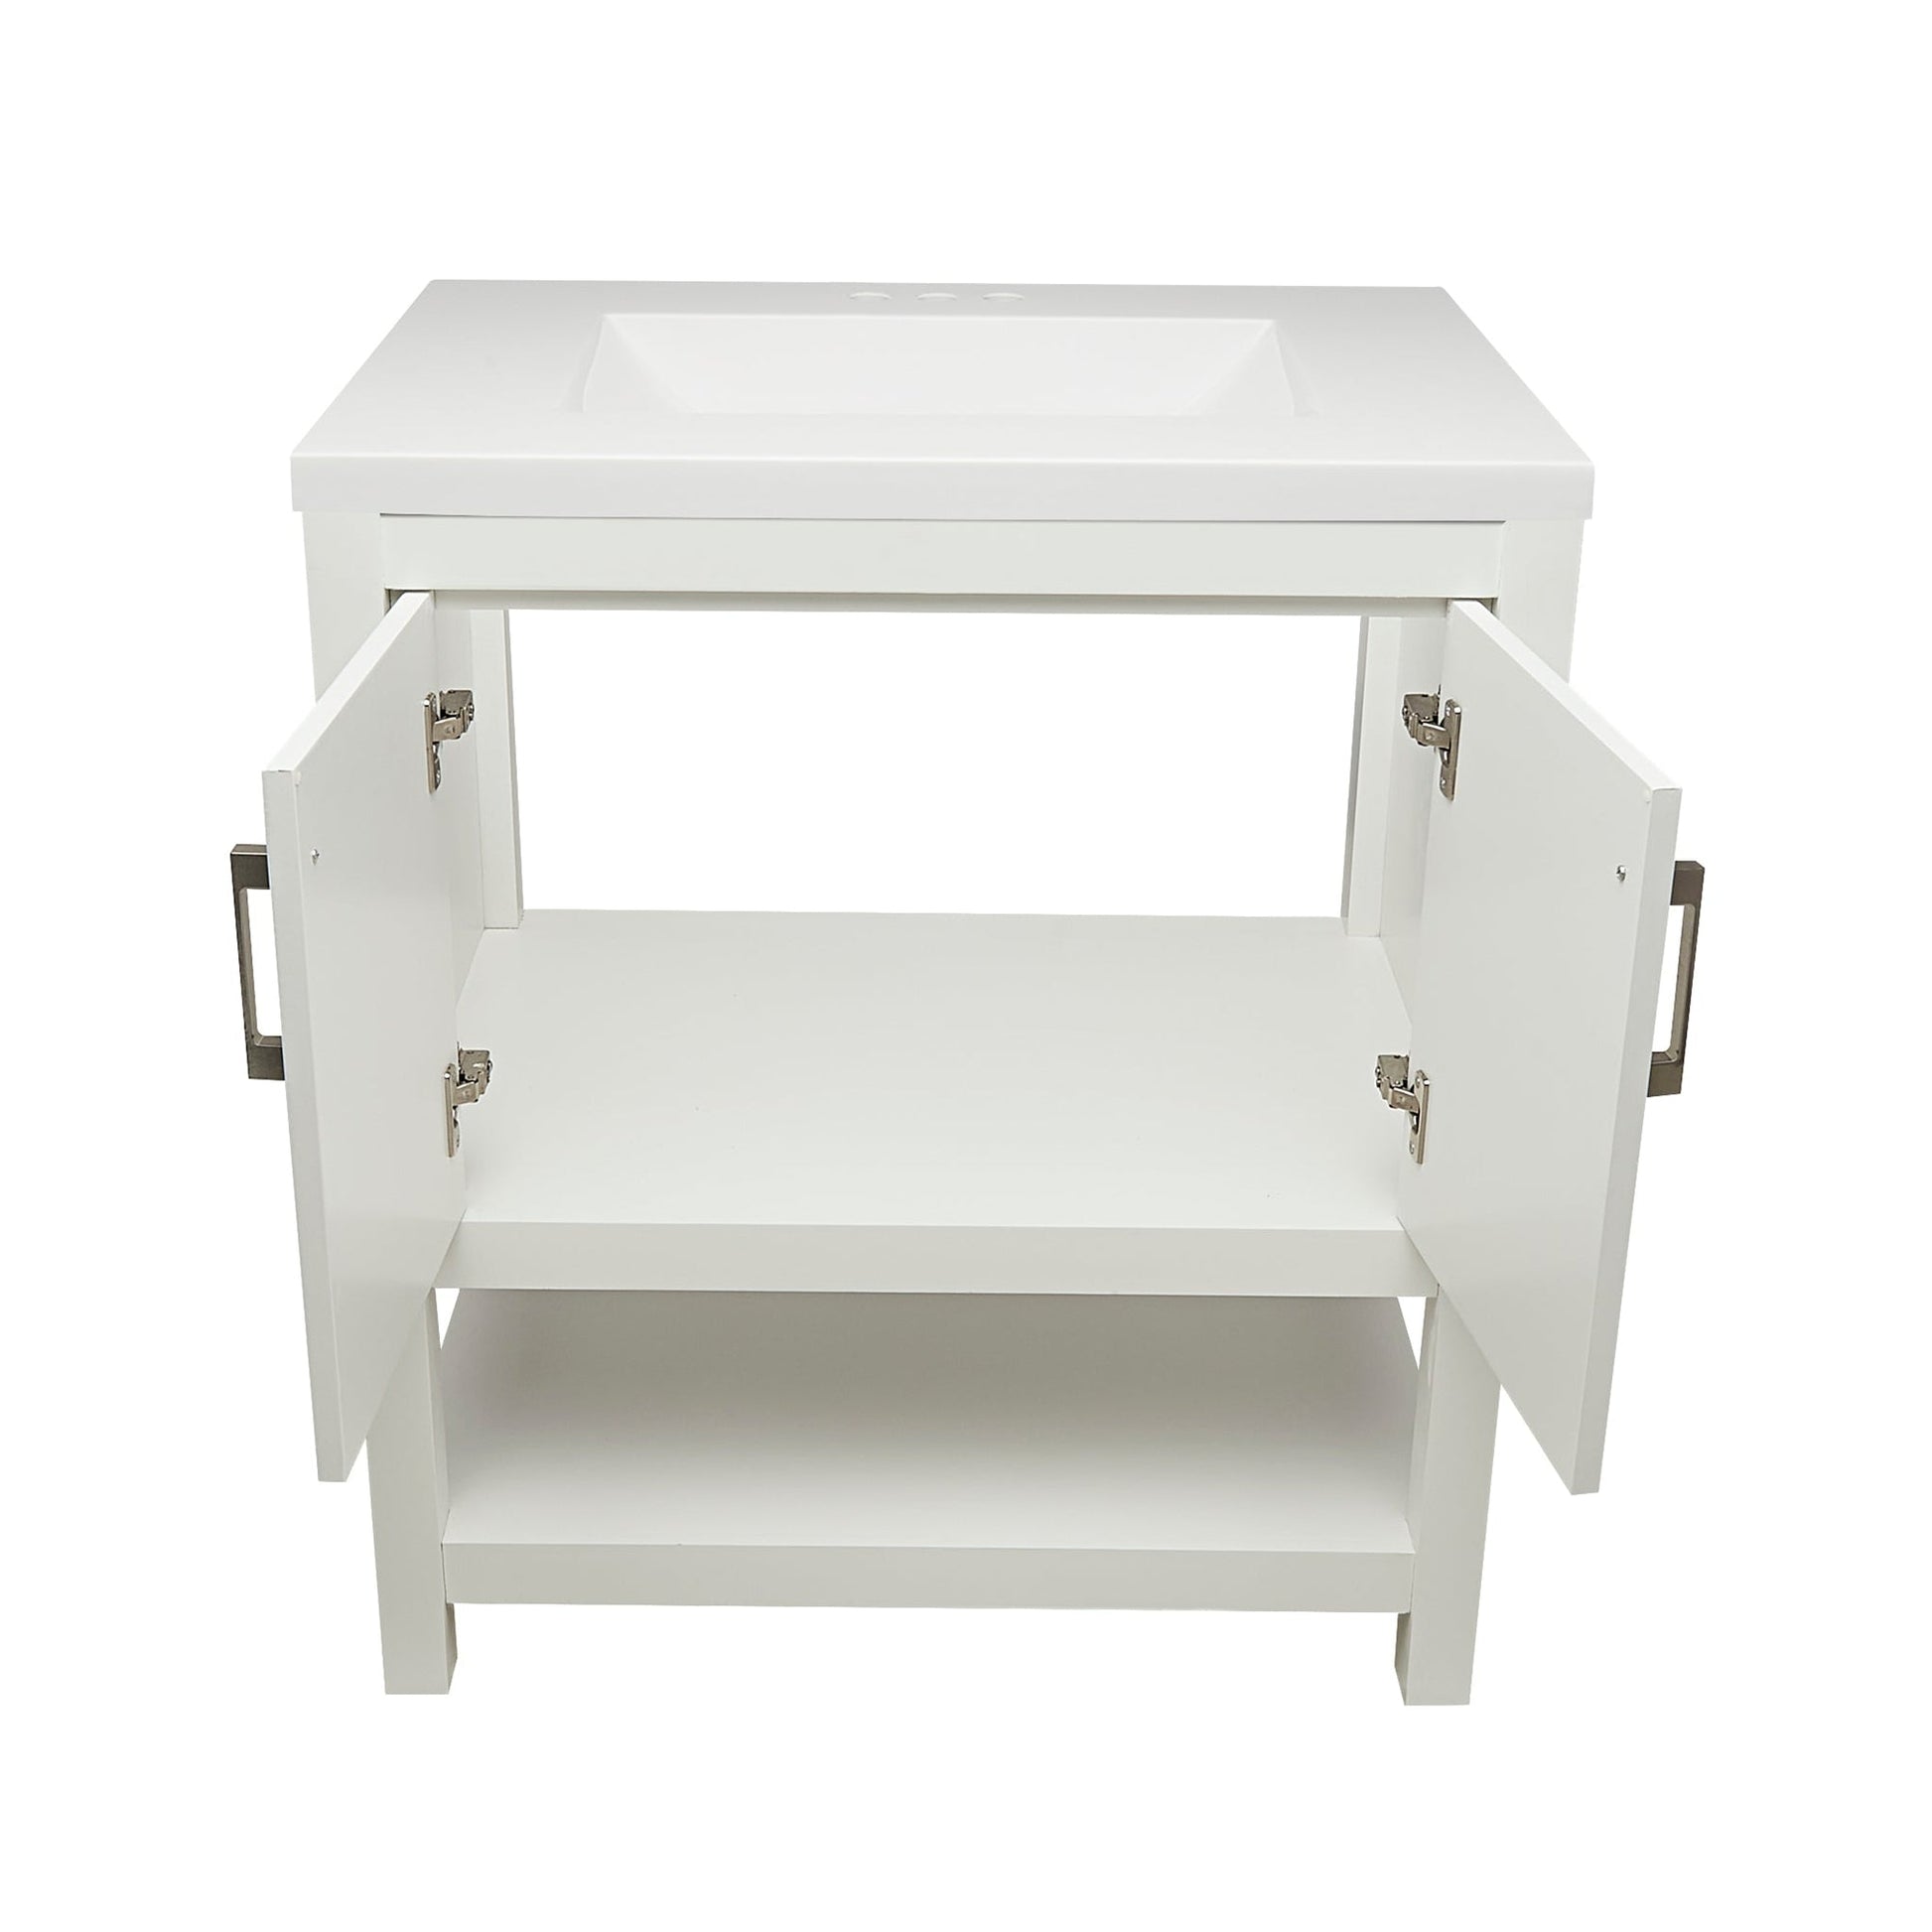 Ella's Bubbles Taos 31" White Bathroom Vanity With White Cultured Marble Top and Sink